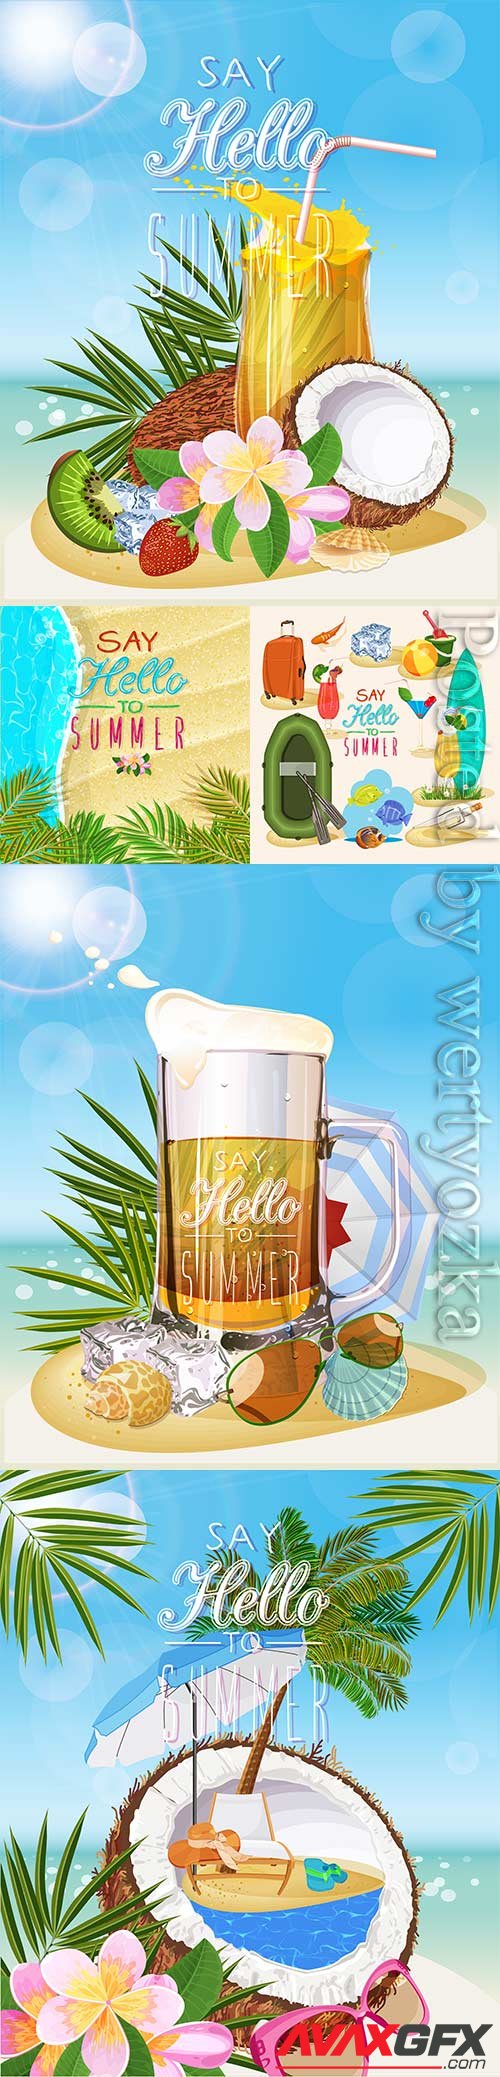 Summer vacation, sea, palm trees, cocktails in vector vol 3